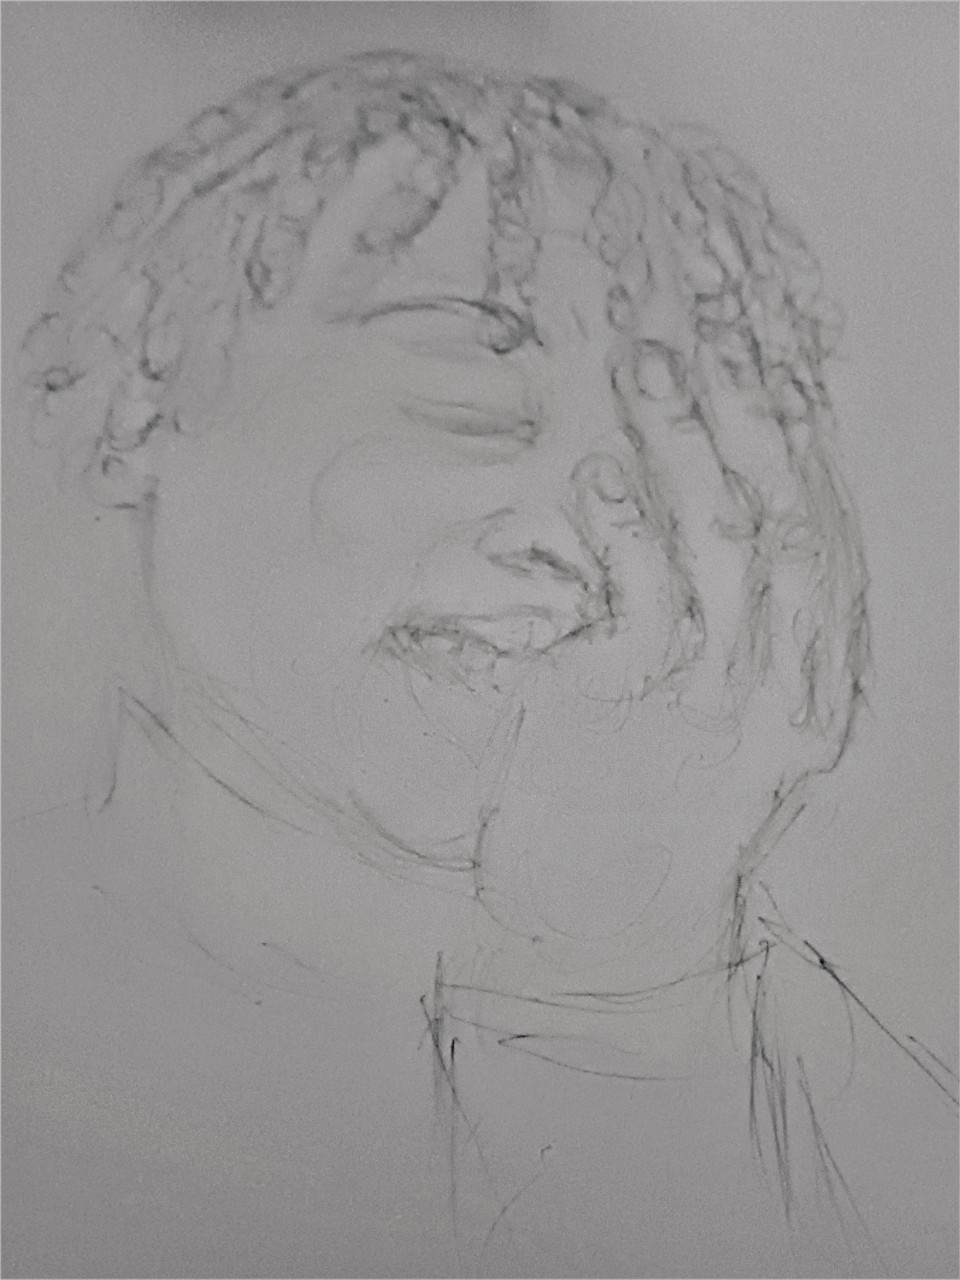 a black-and-white line drawing shows a young woman with curly strands of hair. Her eyes are closed and her hand is covering the left half of her face. 